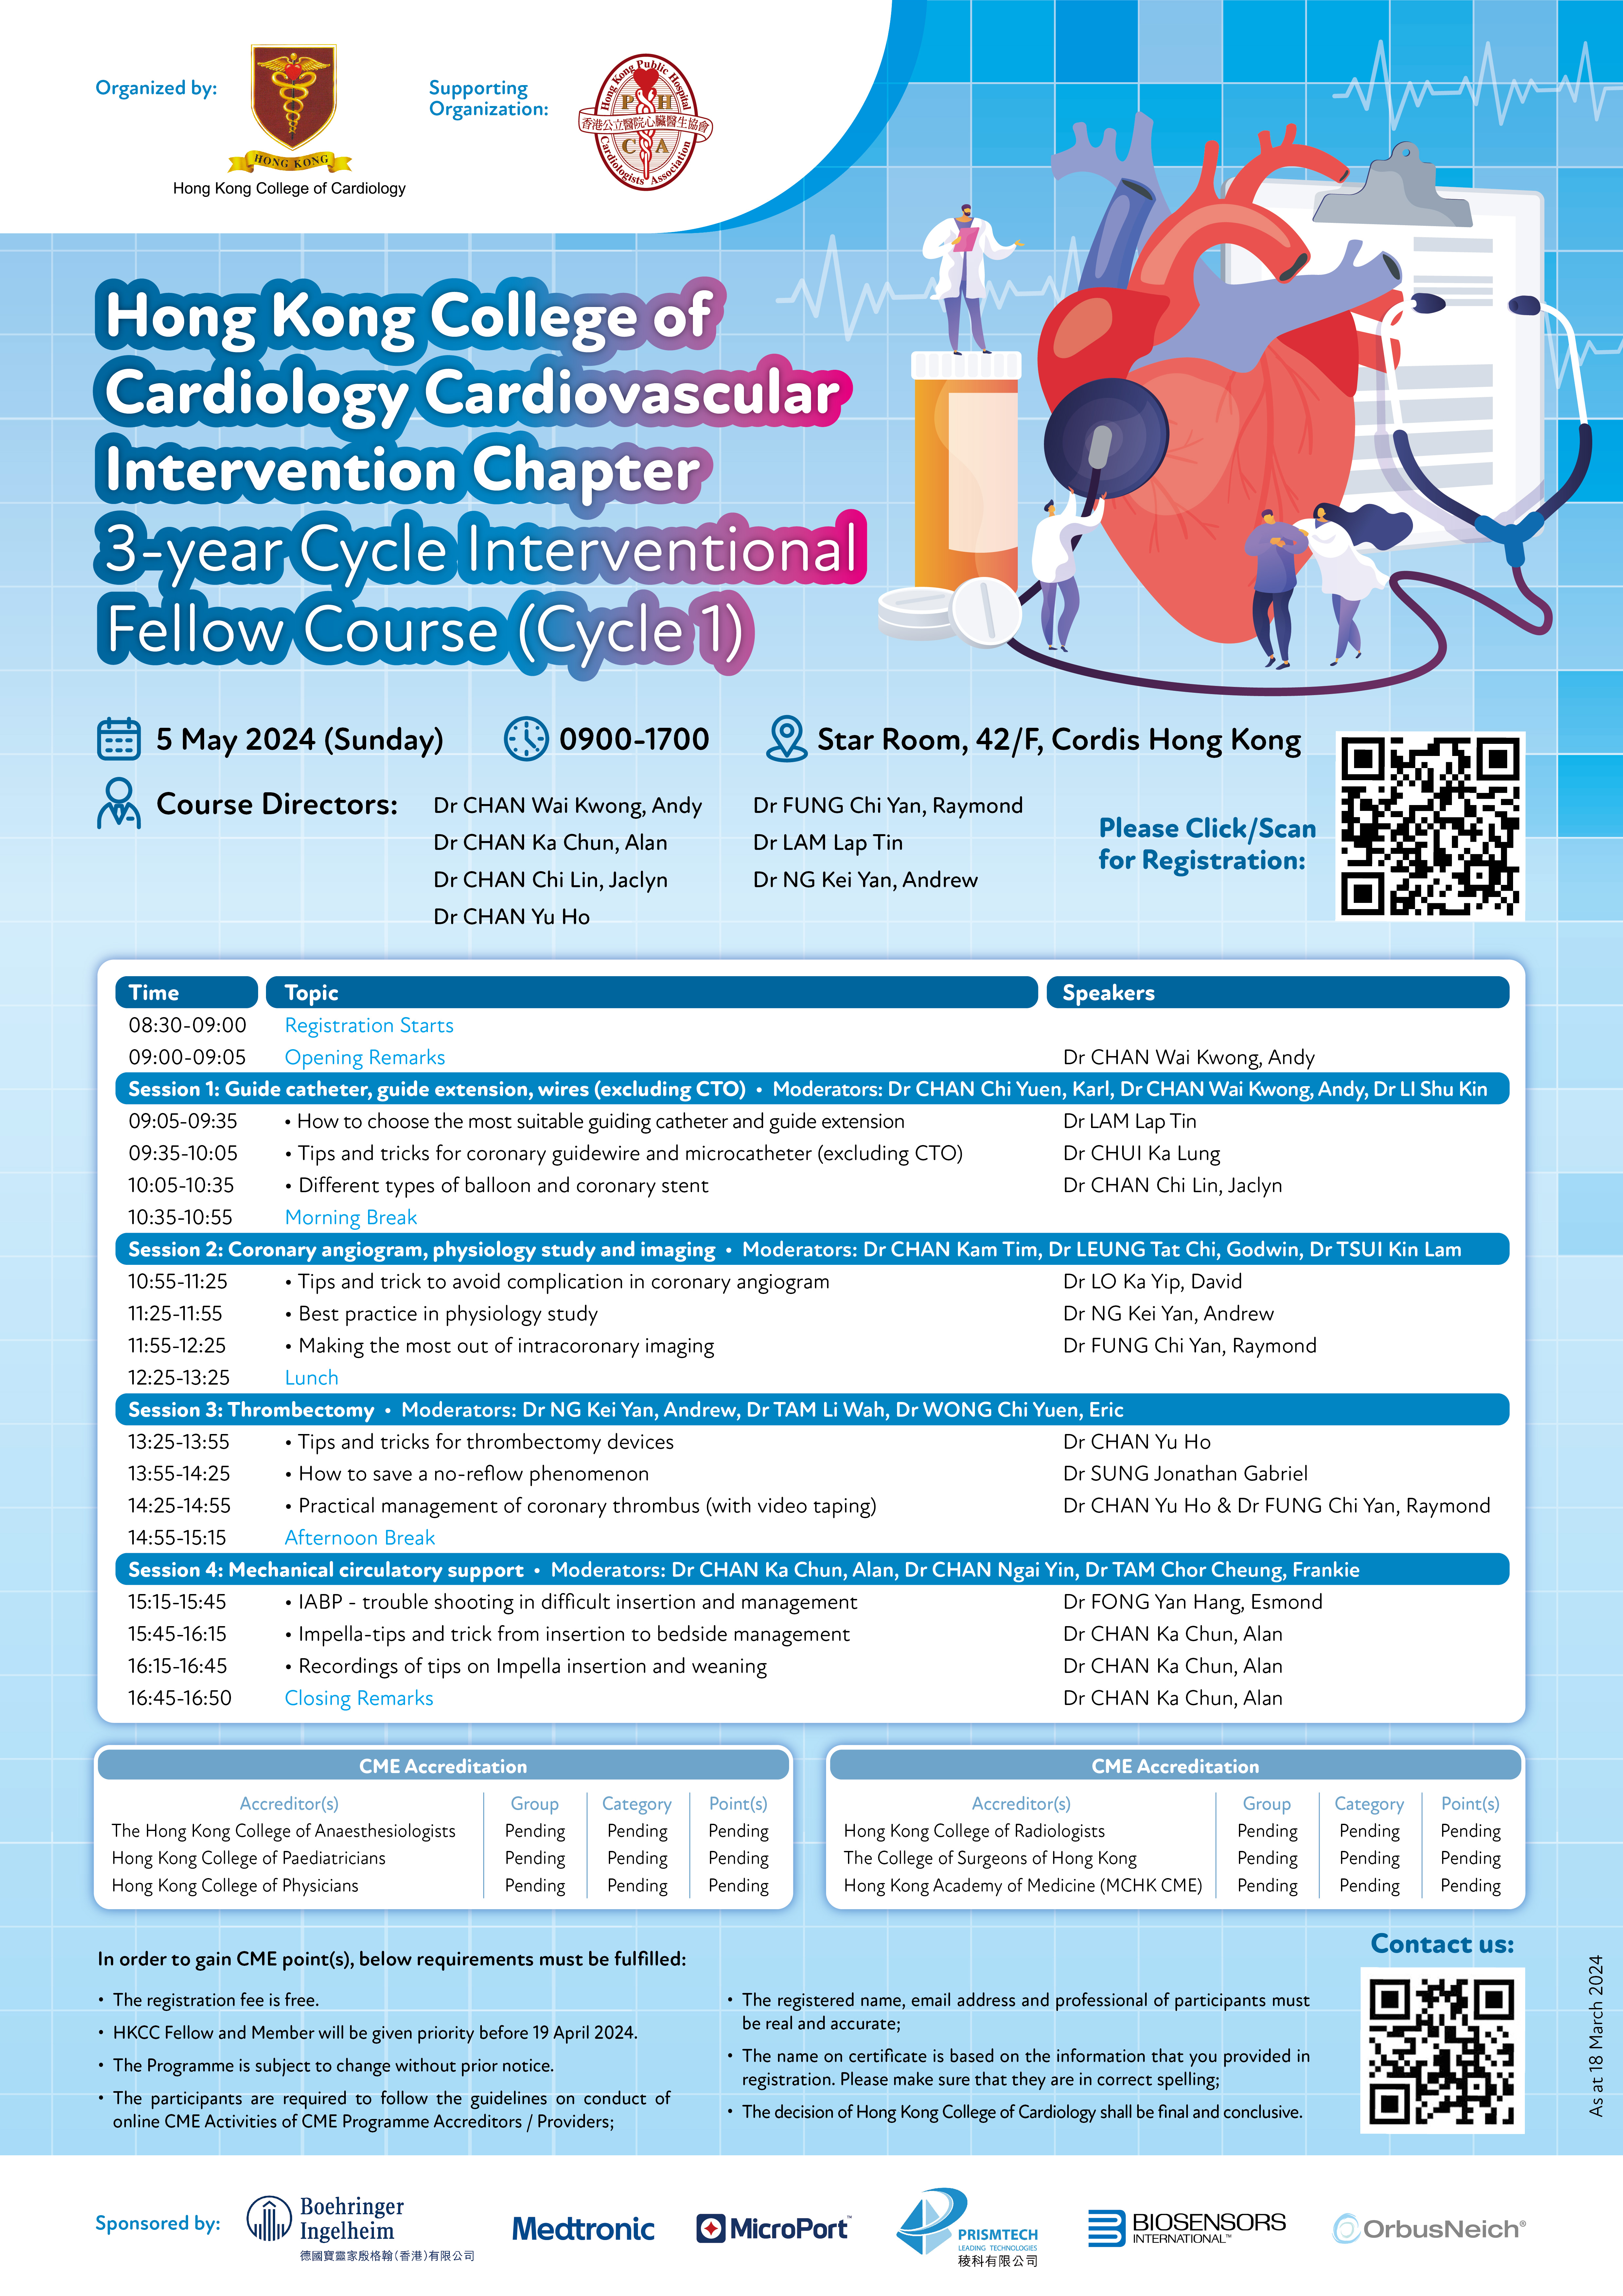 HKCC CVI 3-year Cycle Interventional Fellow Course (Cycle 1)